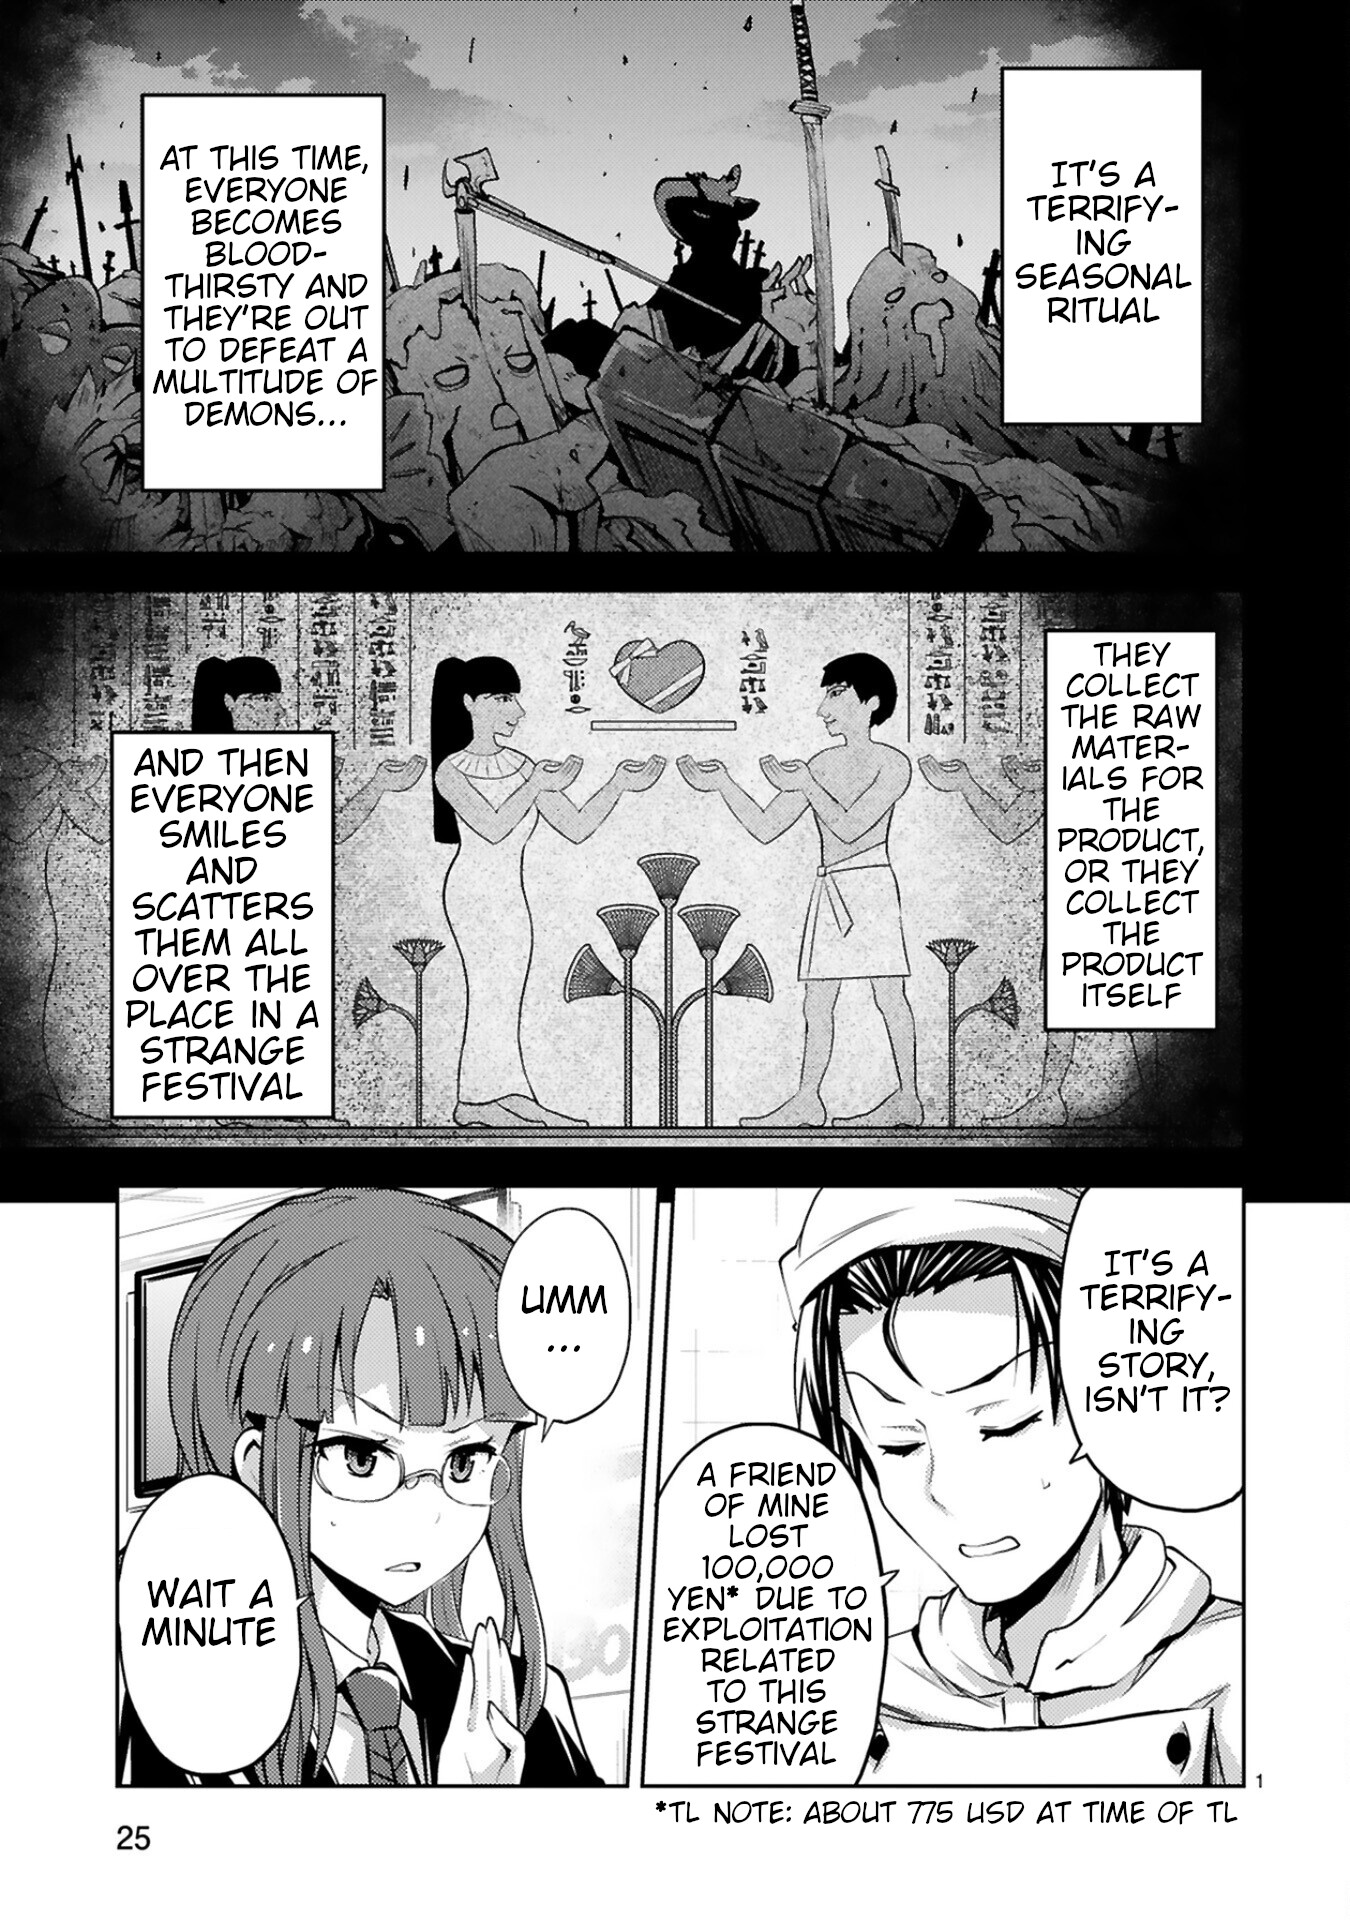 Kuroitsu-San In The Superhuman Research & Development Department Chapter 11: Operation Terrifying Valentine's Day - Picture 1